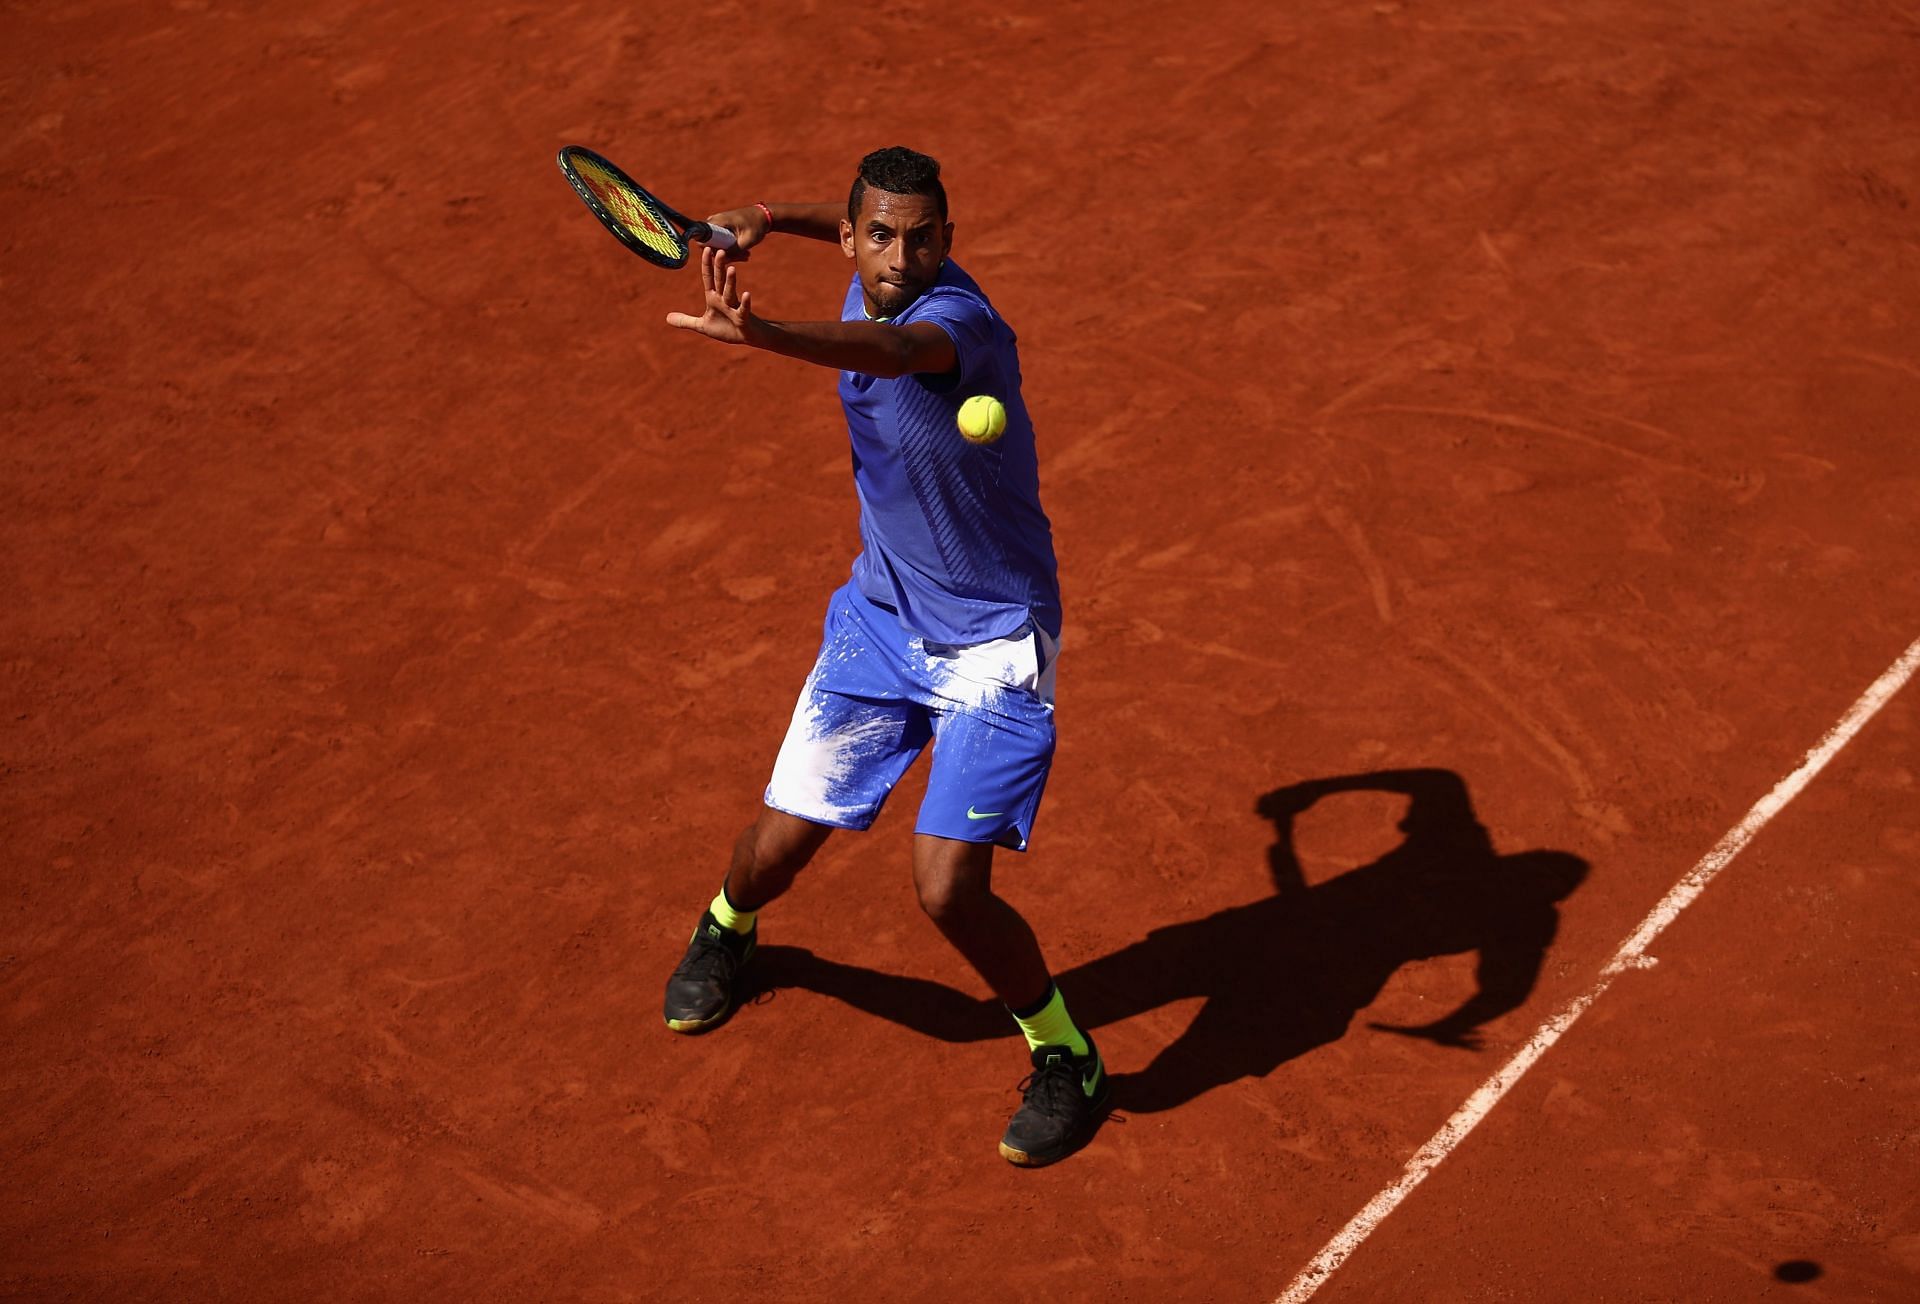 Nick Kyrgios at the 2017 French Open